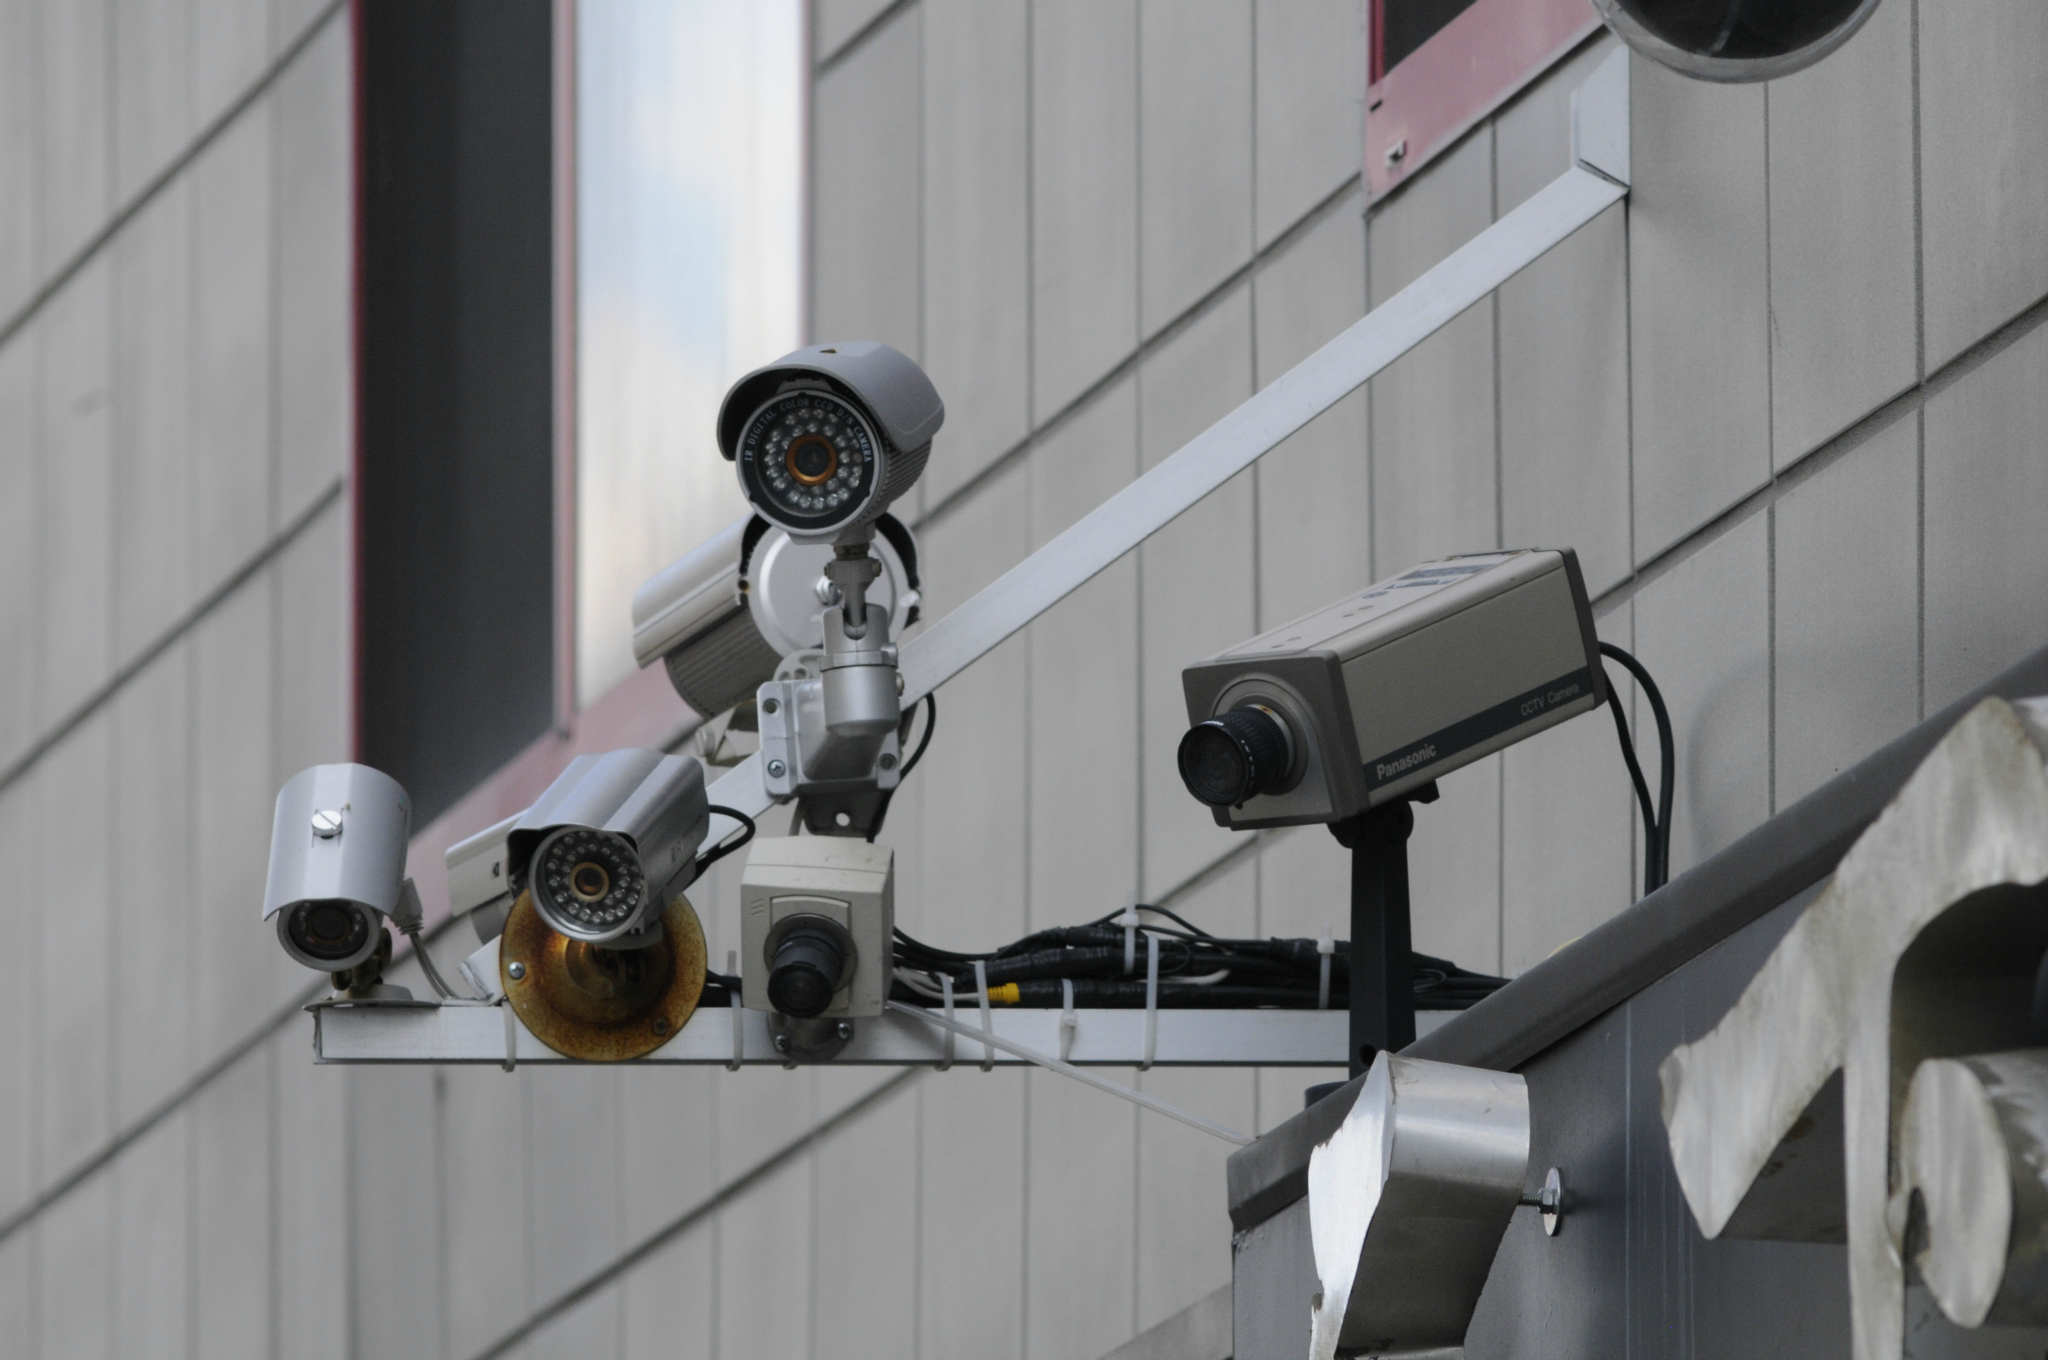 A Camera On Every Corner? The Surveillance Debate After Boston